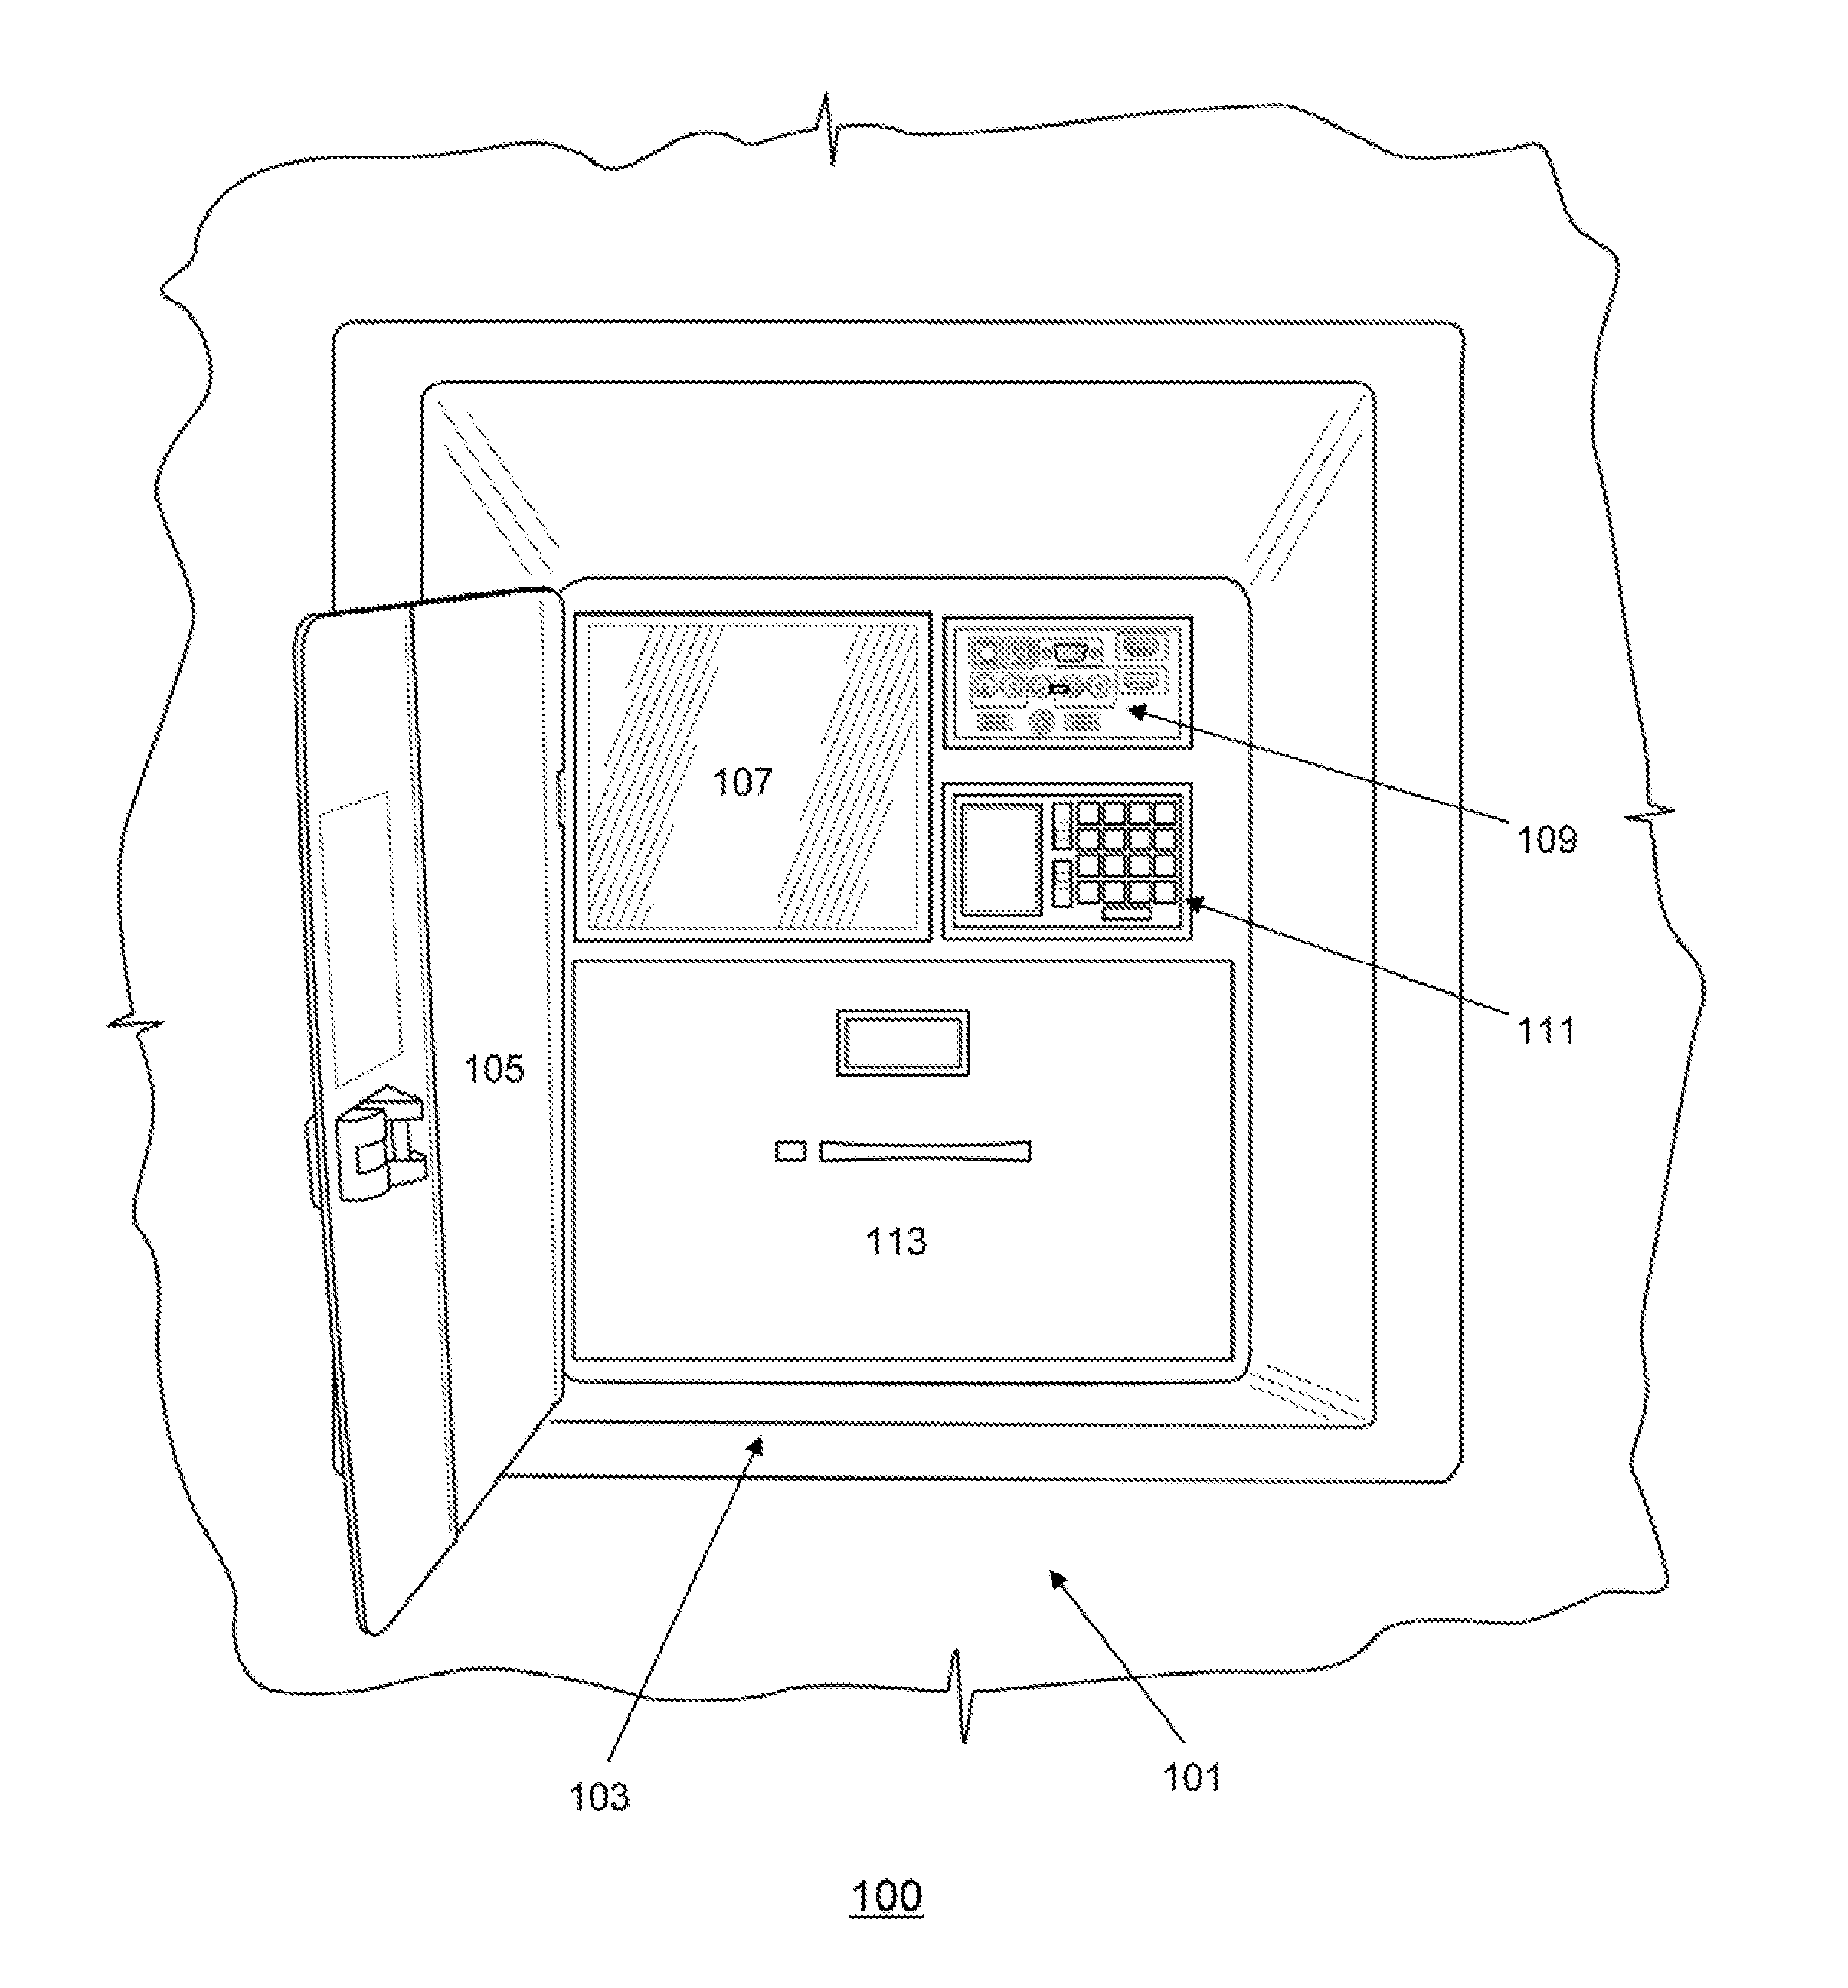 Structurally-embedded construction, design, and maintenance record data management system and related method